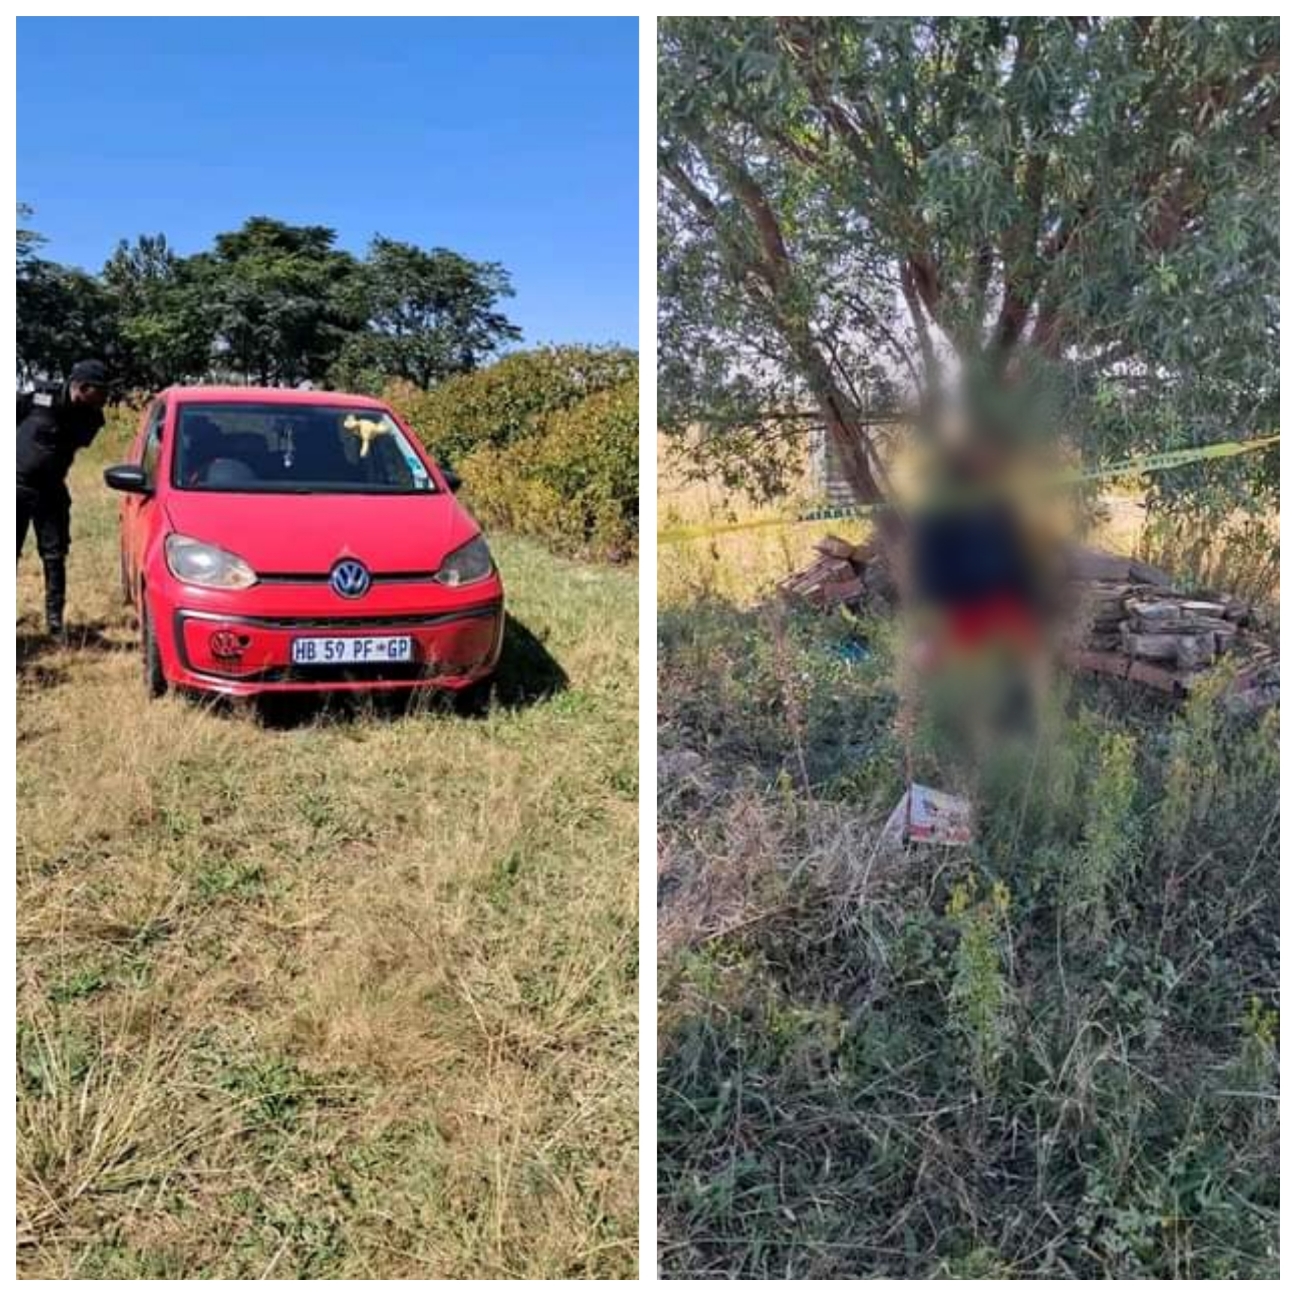 Man parks his car at cemetery in South Africa and commits suicide